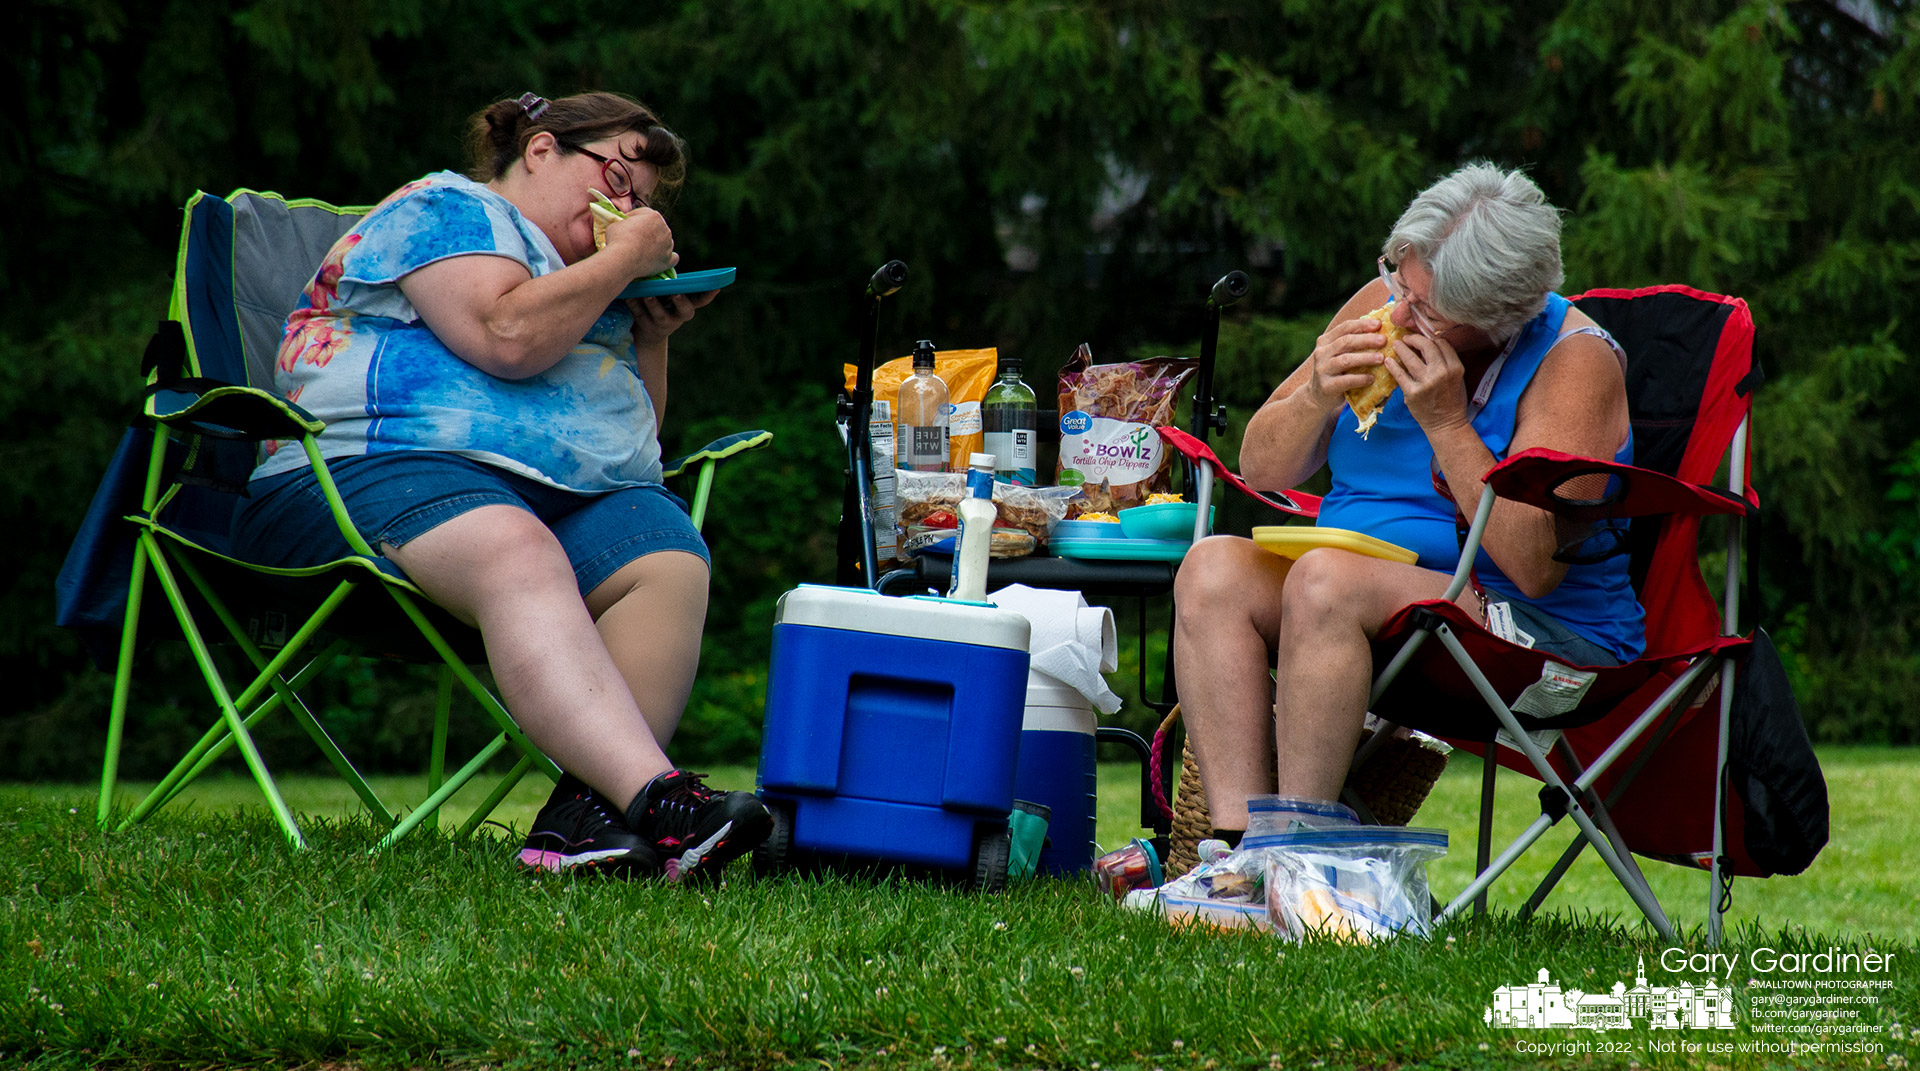 Two mothers bite into their chicken sandwiches during lunch at Alum Creek Park where they waited for their children to complete choir camp at Otterbein University. My Final Photo for June 20, 2022.